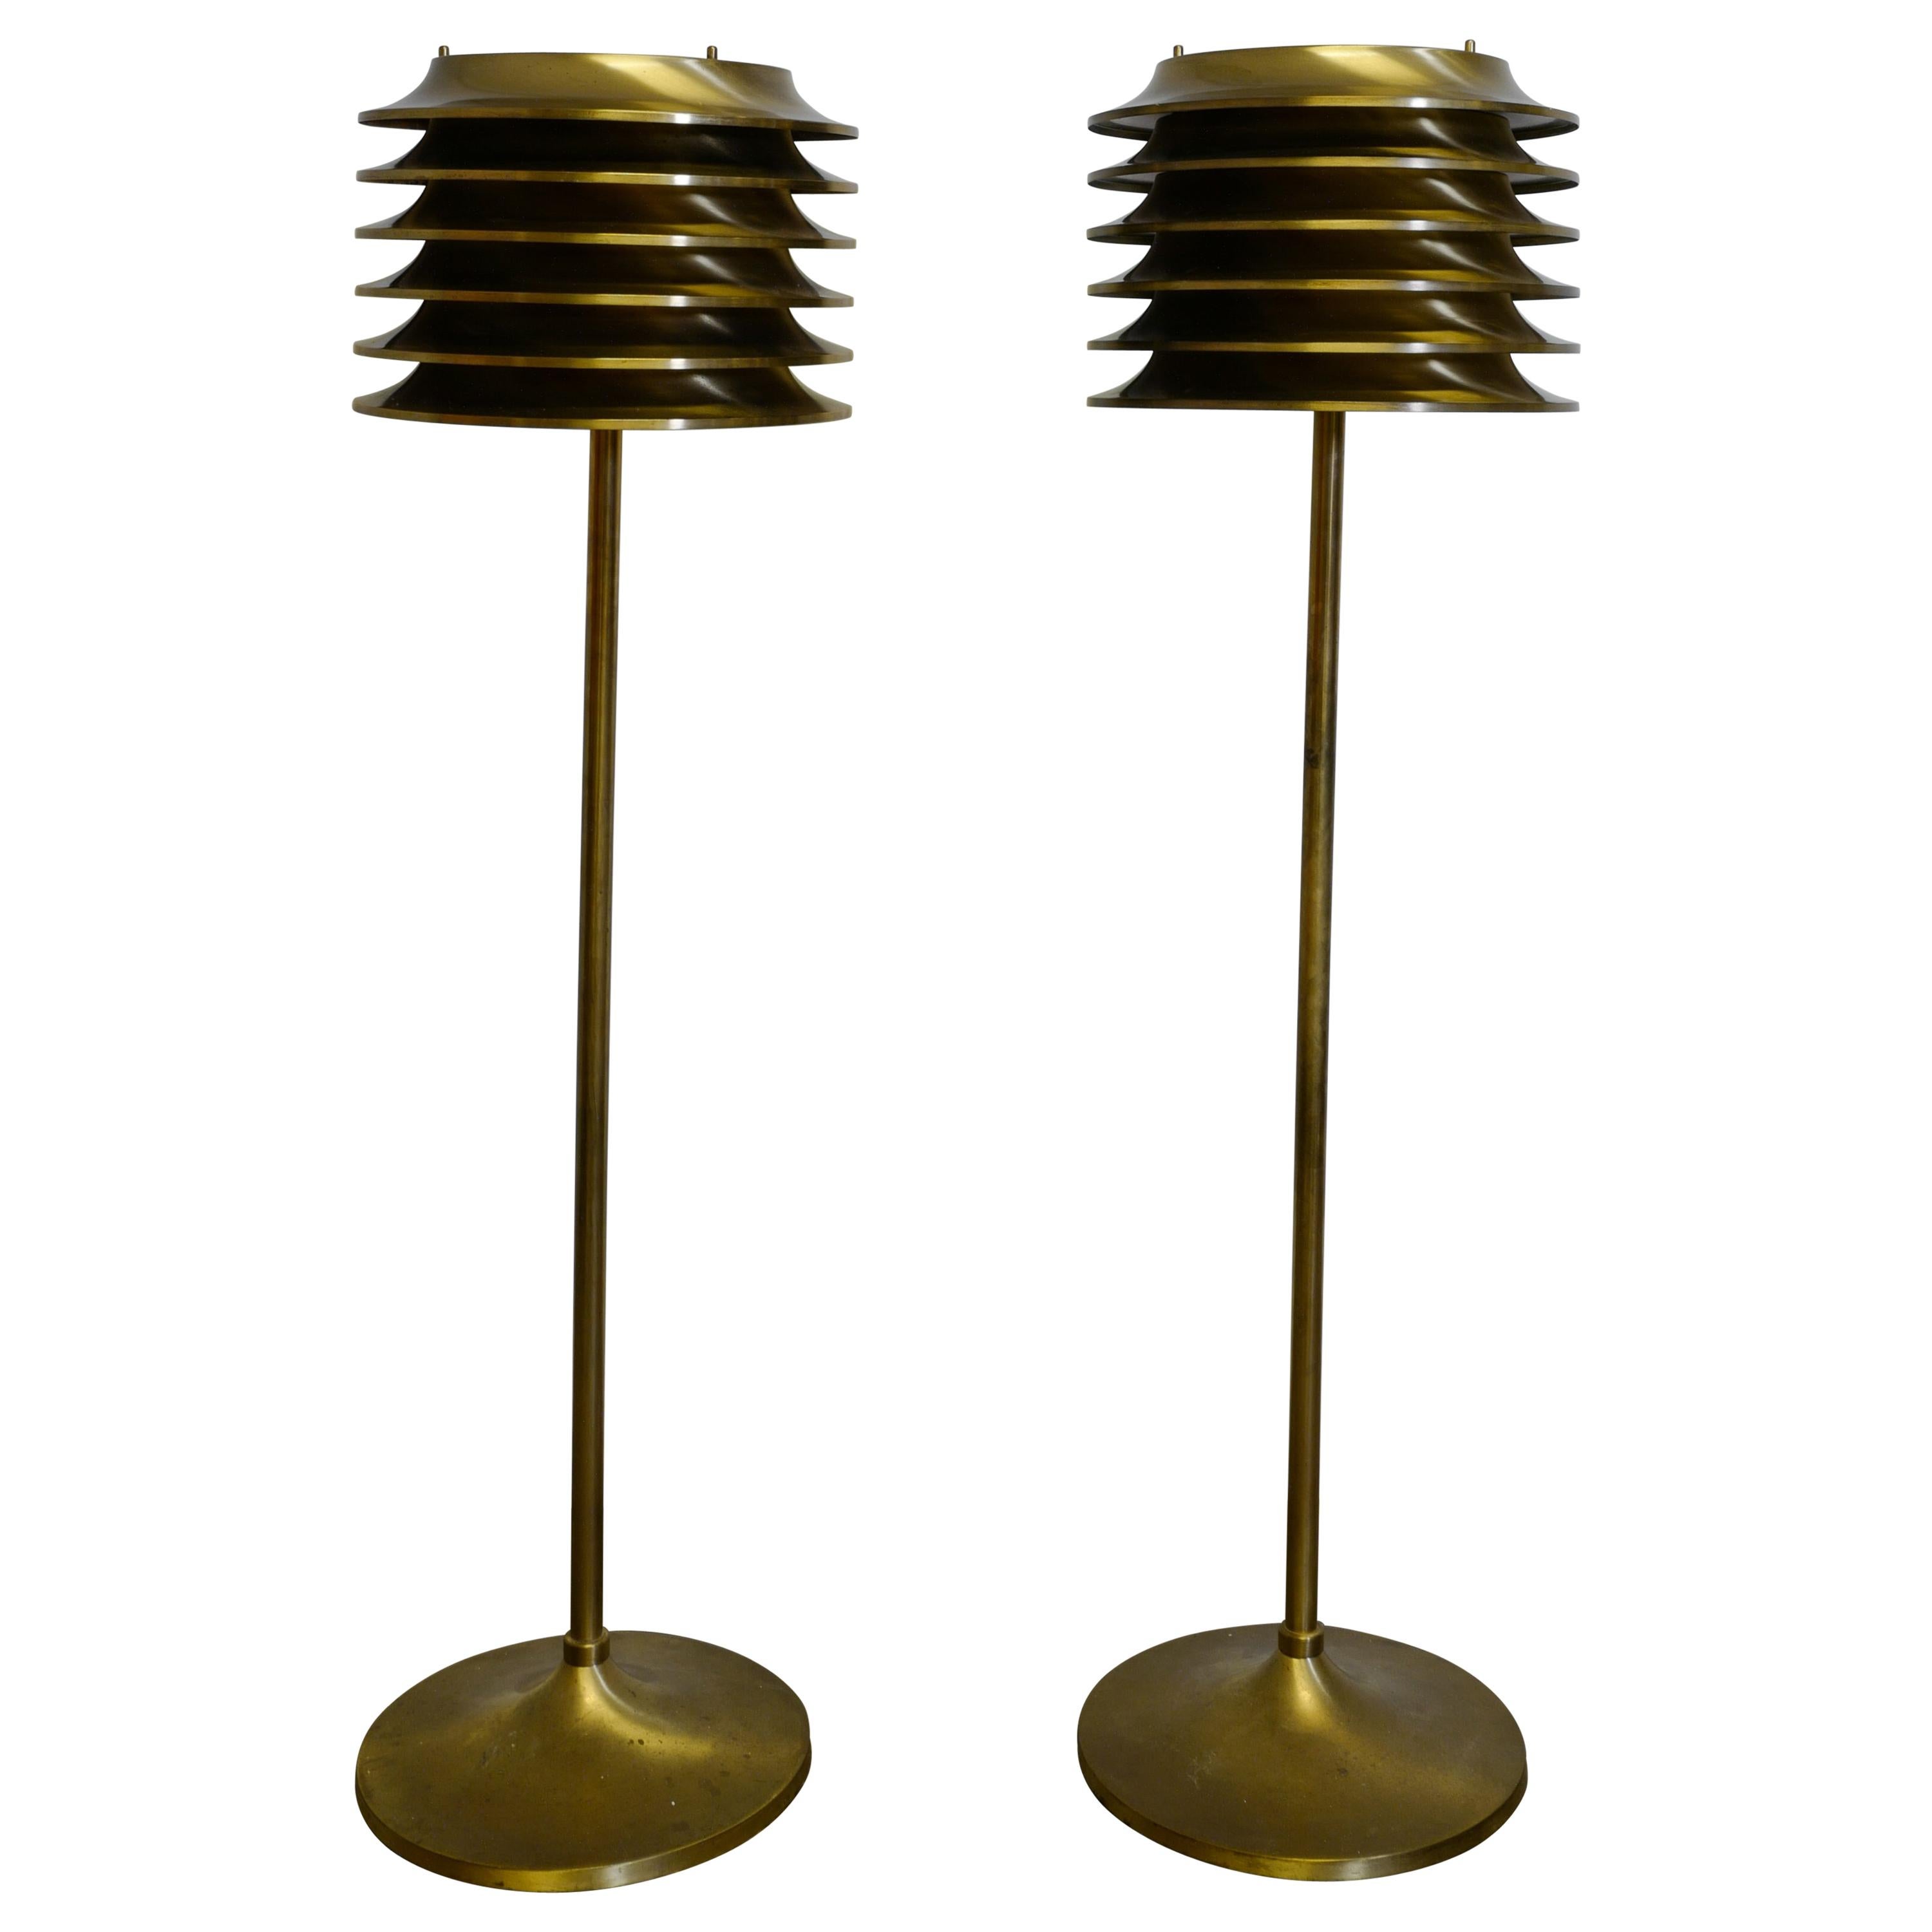 Pair of Kai Ruokonen Floor Lamps in Brass for Orno Oy, Finland, 1970s